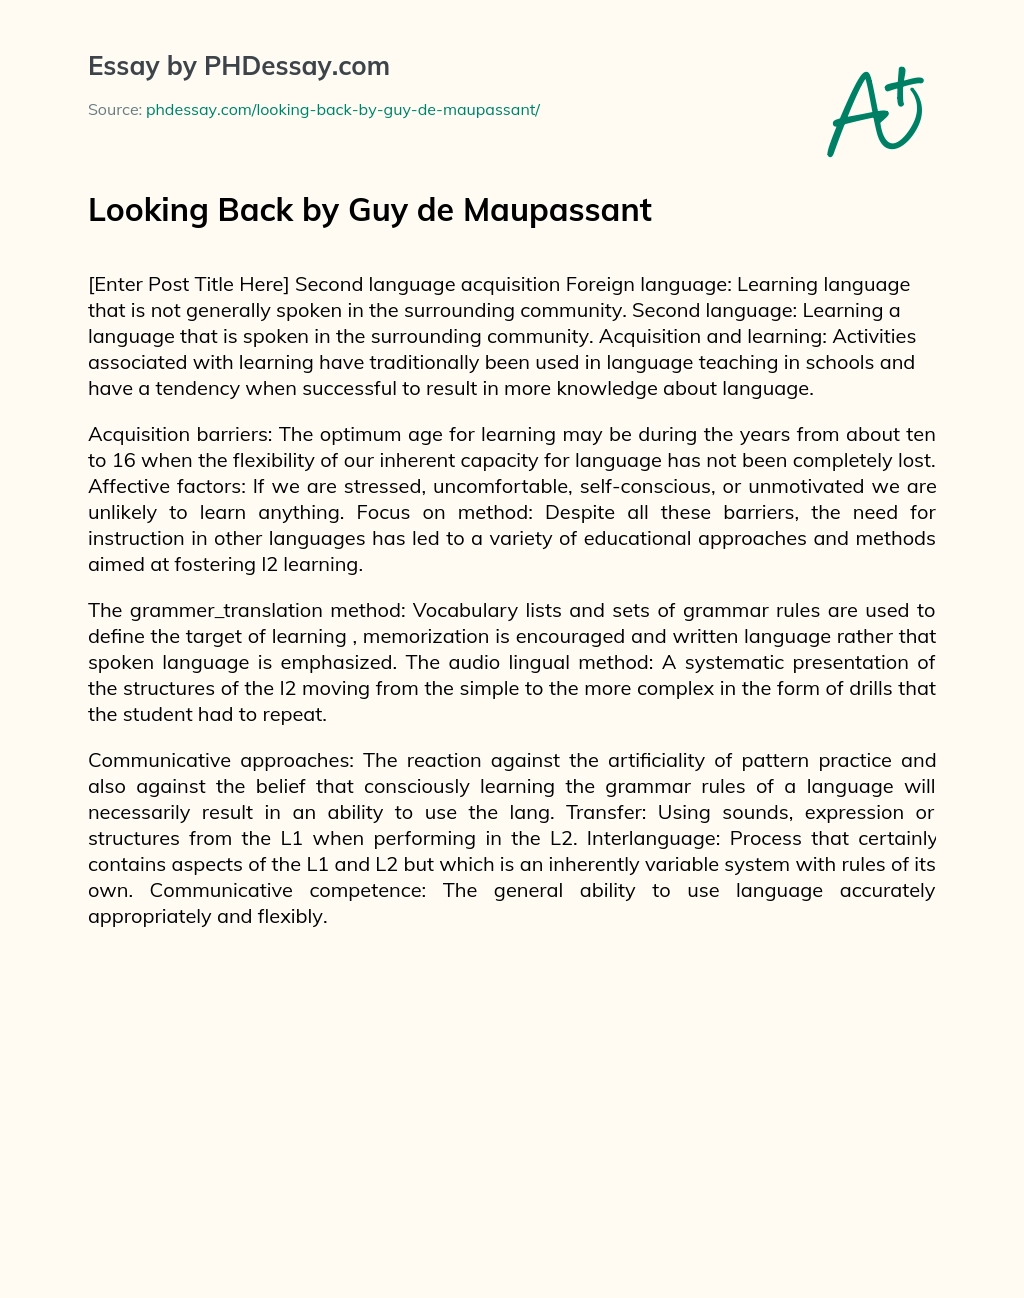 Looking Back by Guy de Maupassant essay